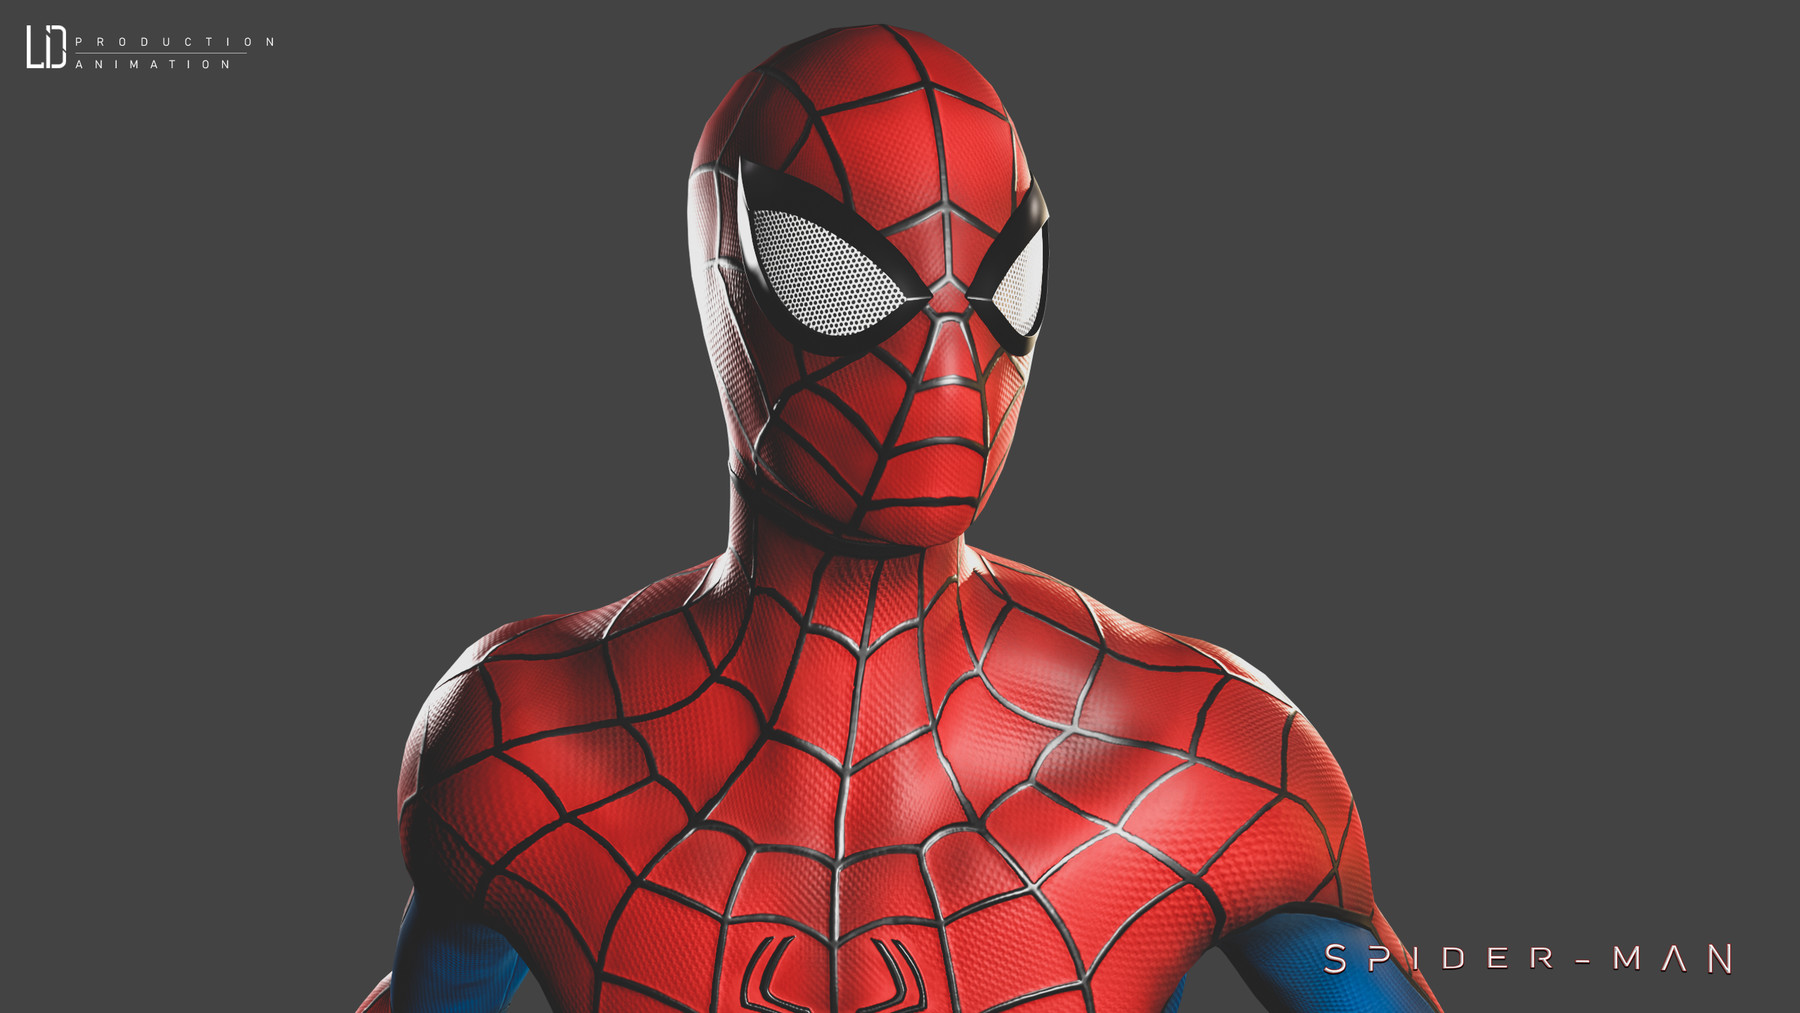 Spider-Man download the new version for windows